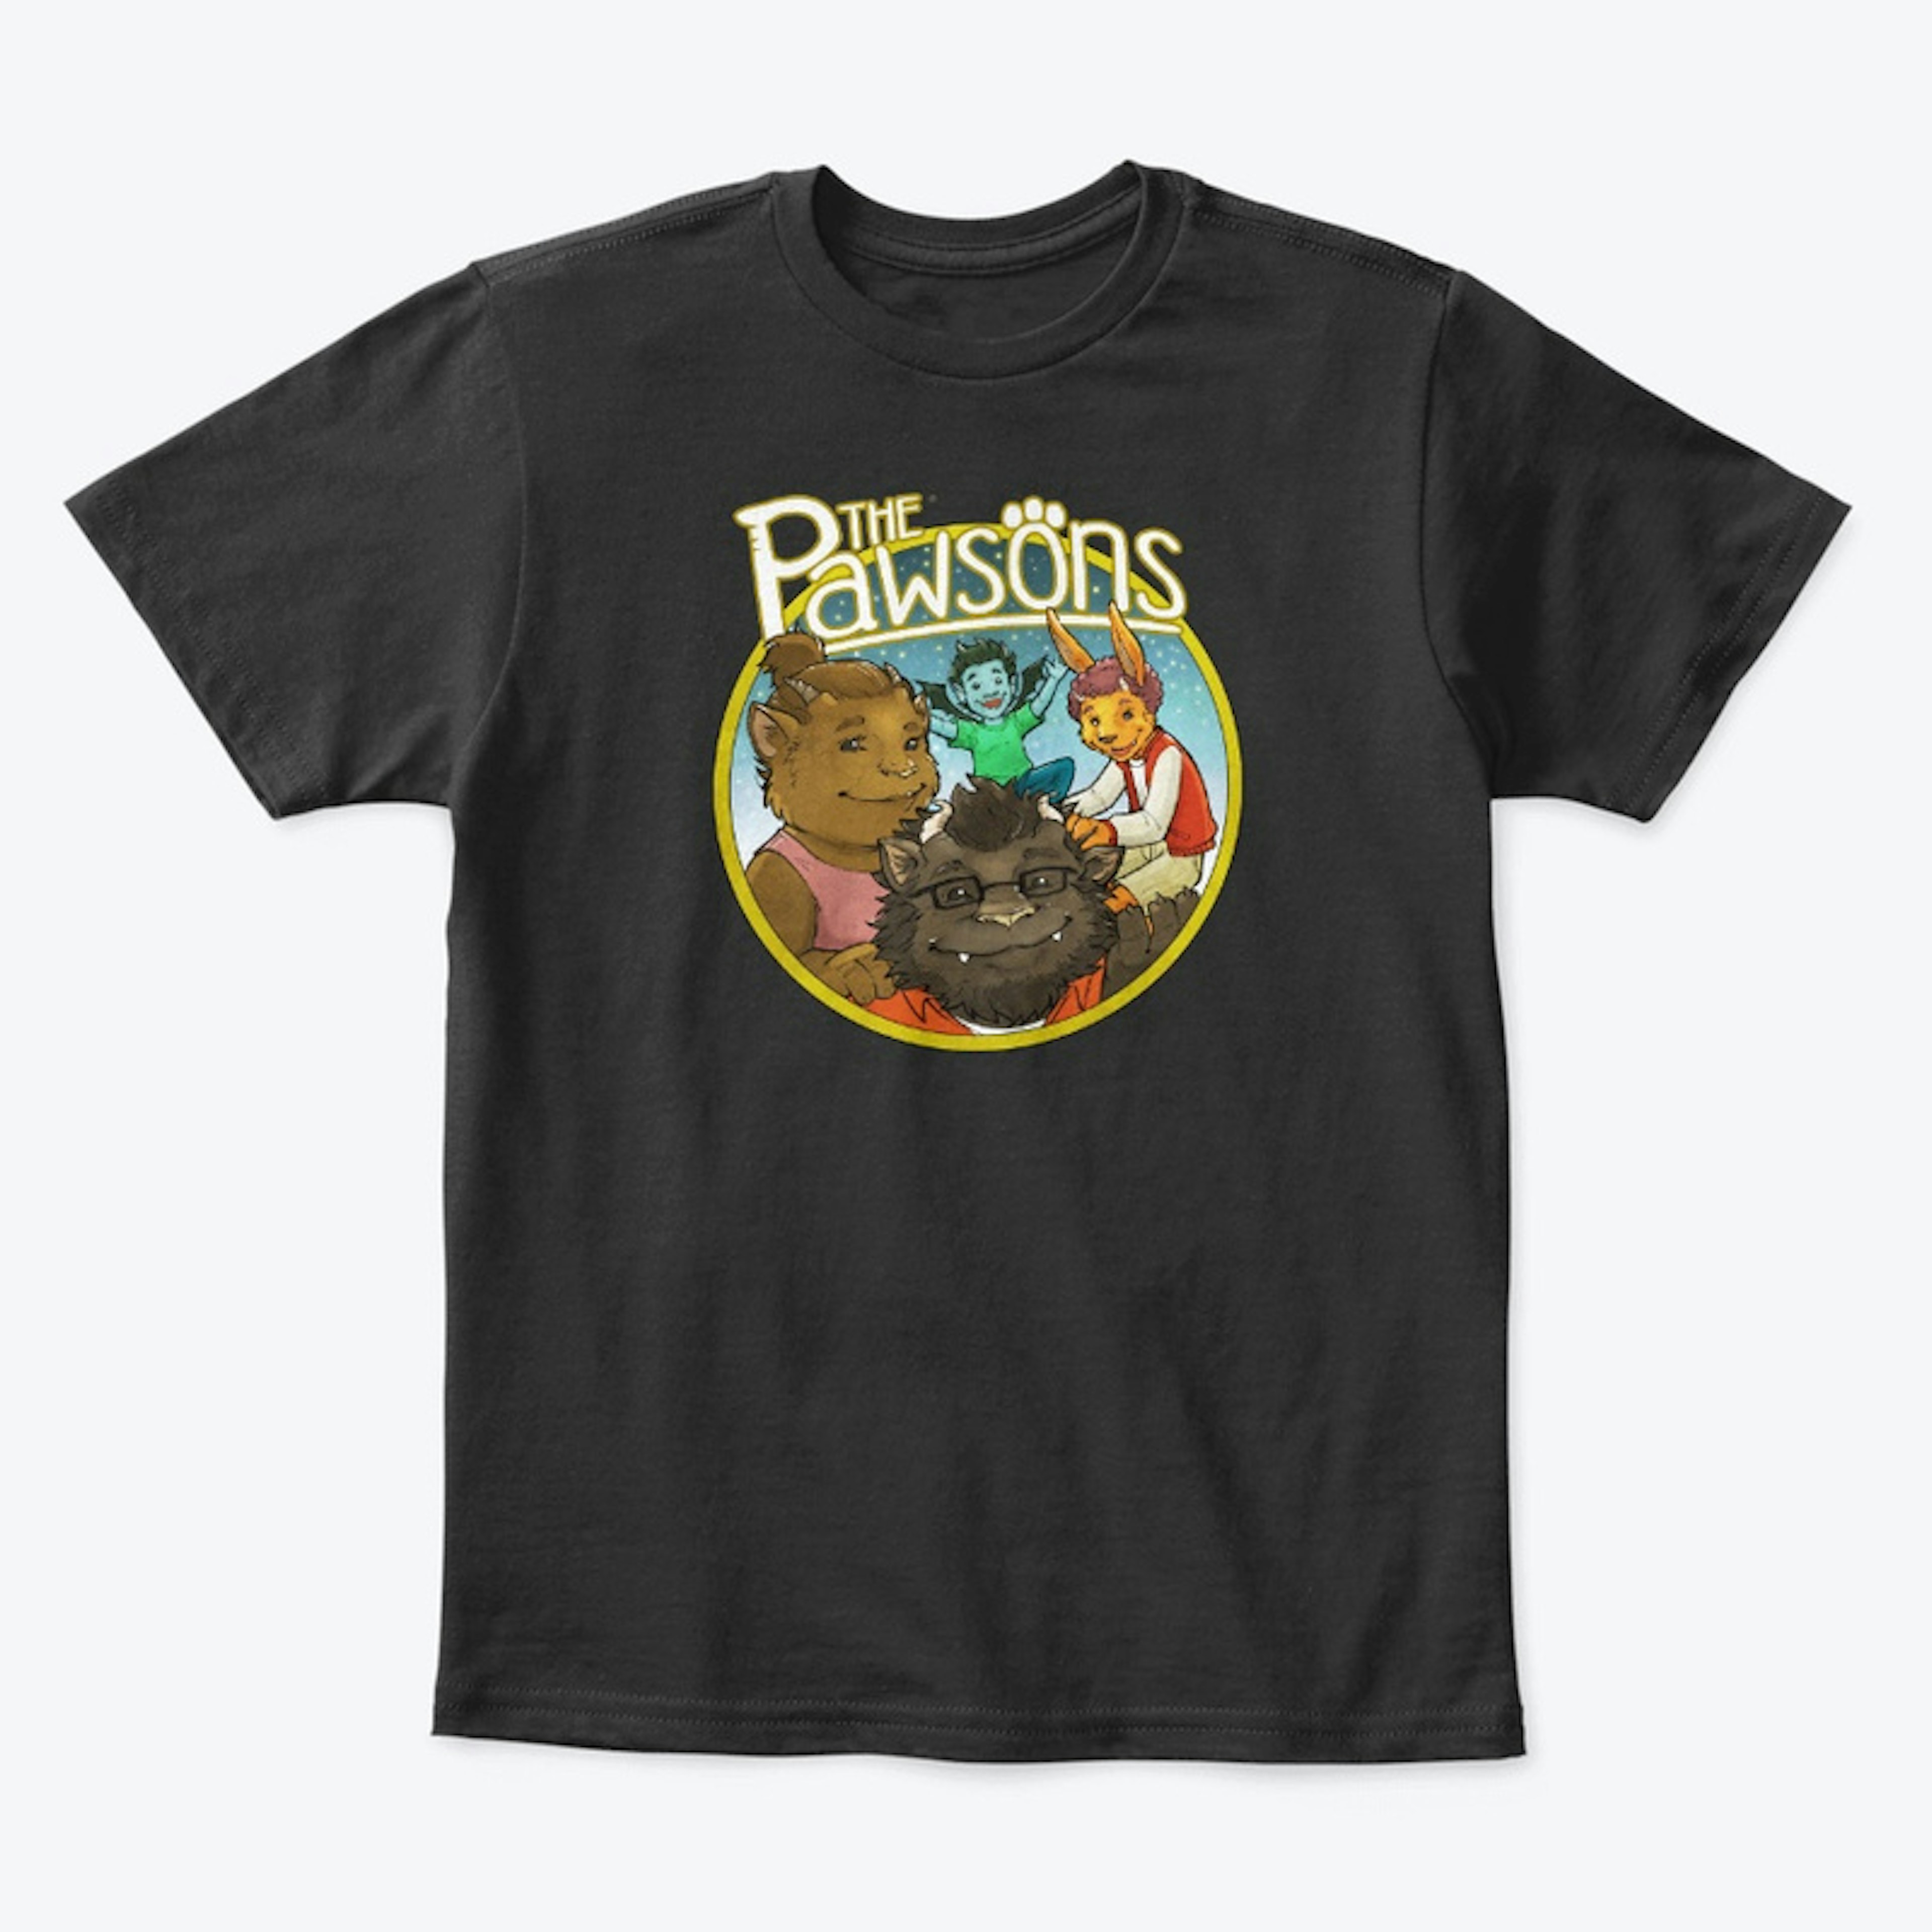 The Pawsons merch is here!